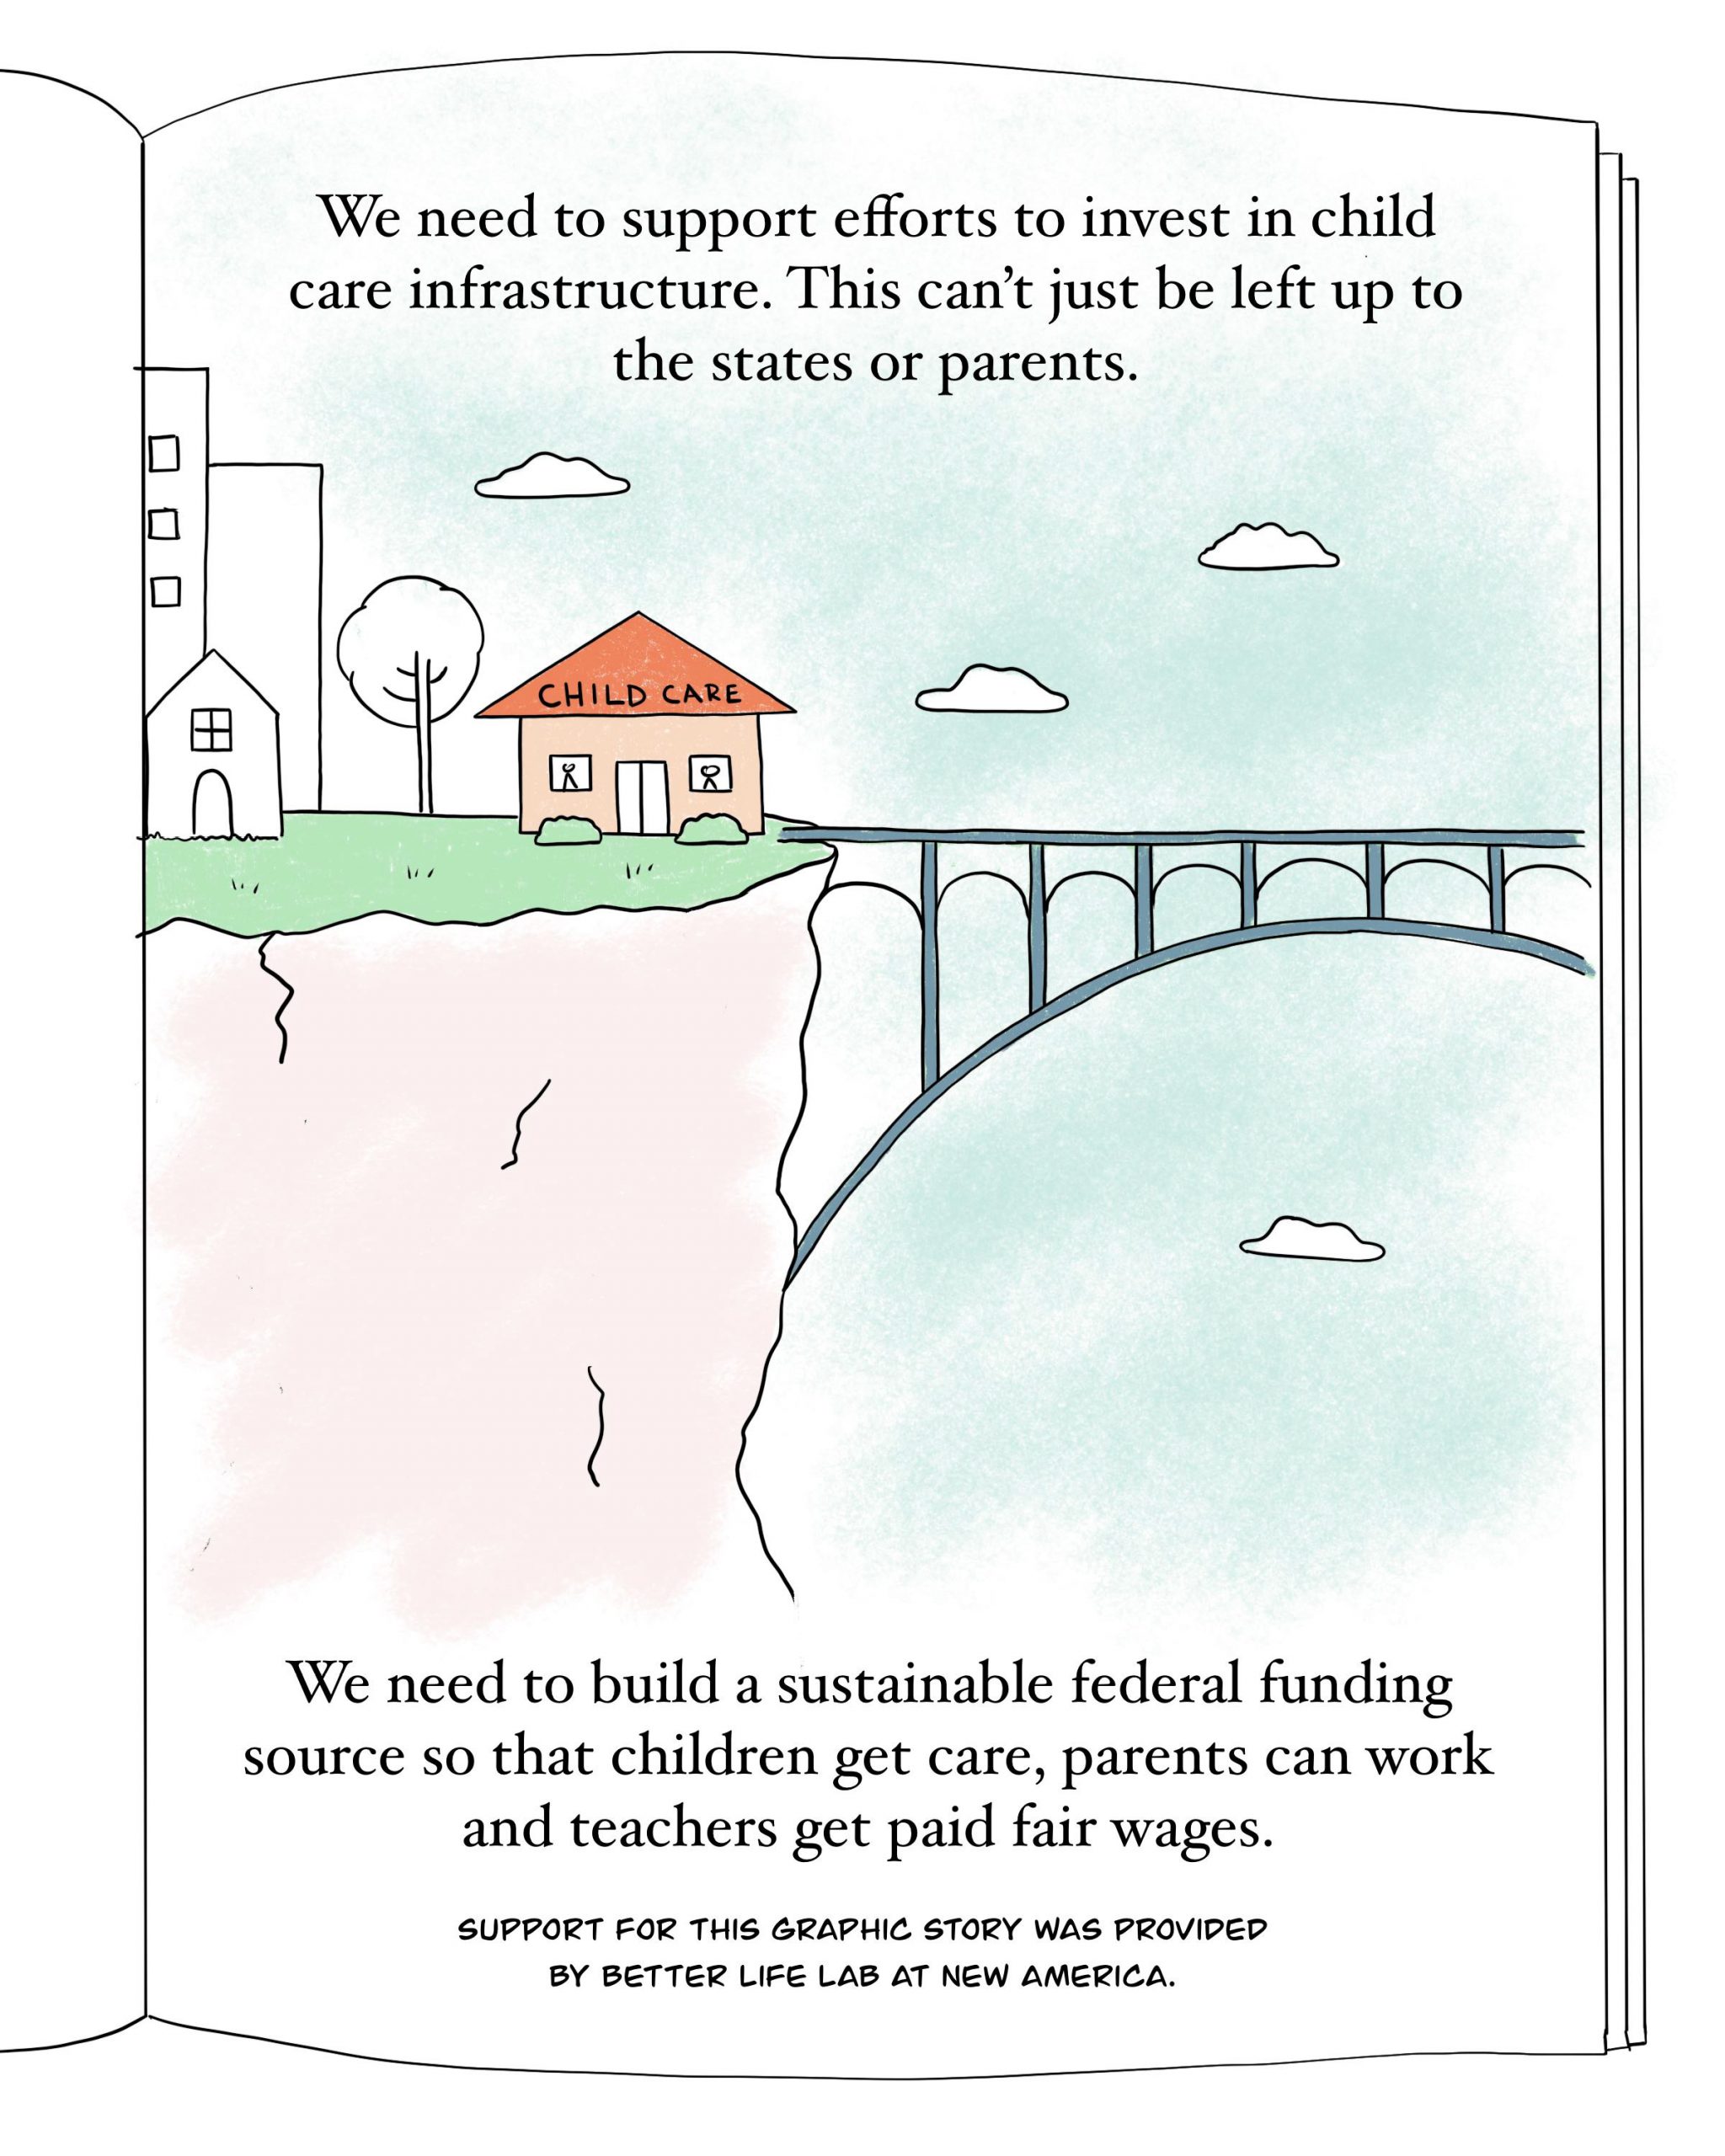 A child care center at the edge of a cliff but with a bridge built to support it. The text reads:

We need to support efforts to invest in child care infrastructure. This can't just be left up to
the states or parents.

We need to build a sustainable federal funding source so that children get care, parents can work and teachers get paid fair wages.

Support for this graphic story was provided by the Better Life Lab at New America.
